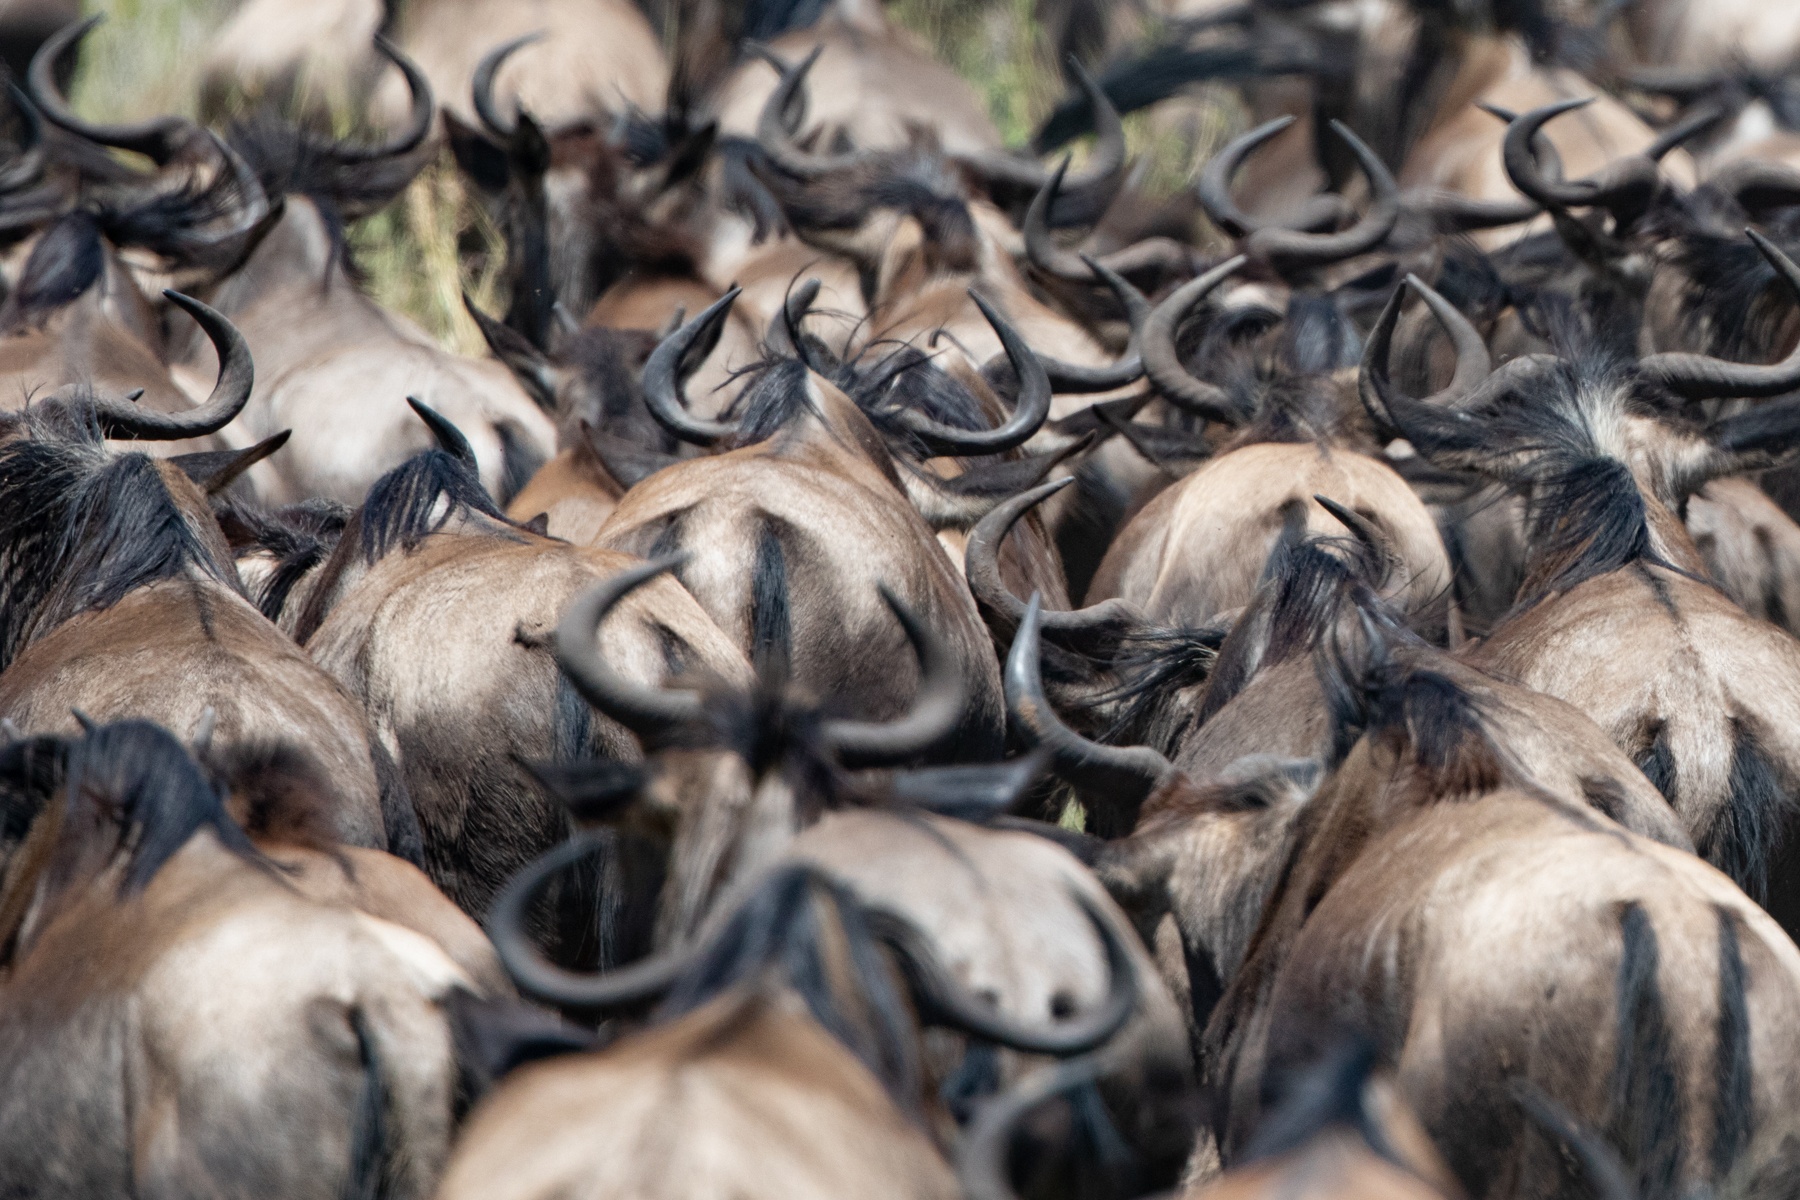 The backs of a wildebeest herd on migration in the Serengeti